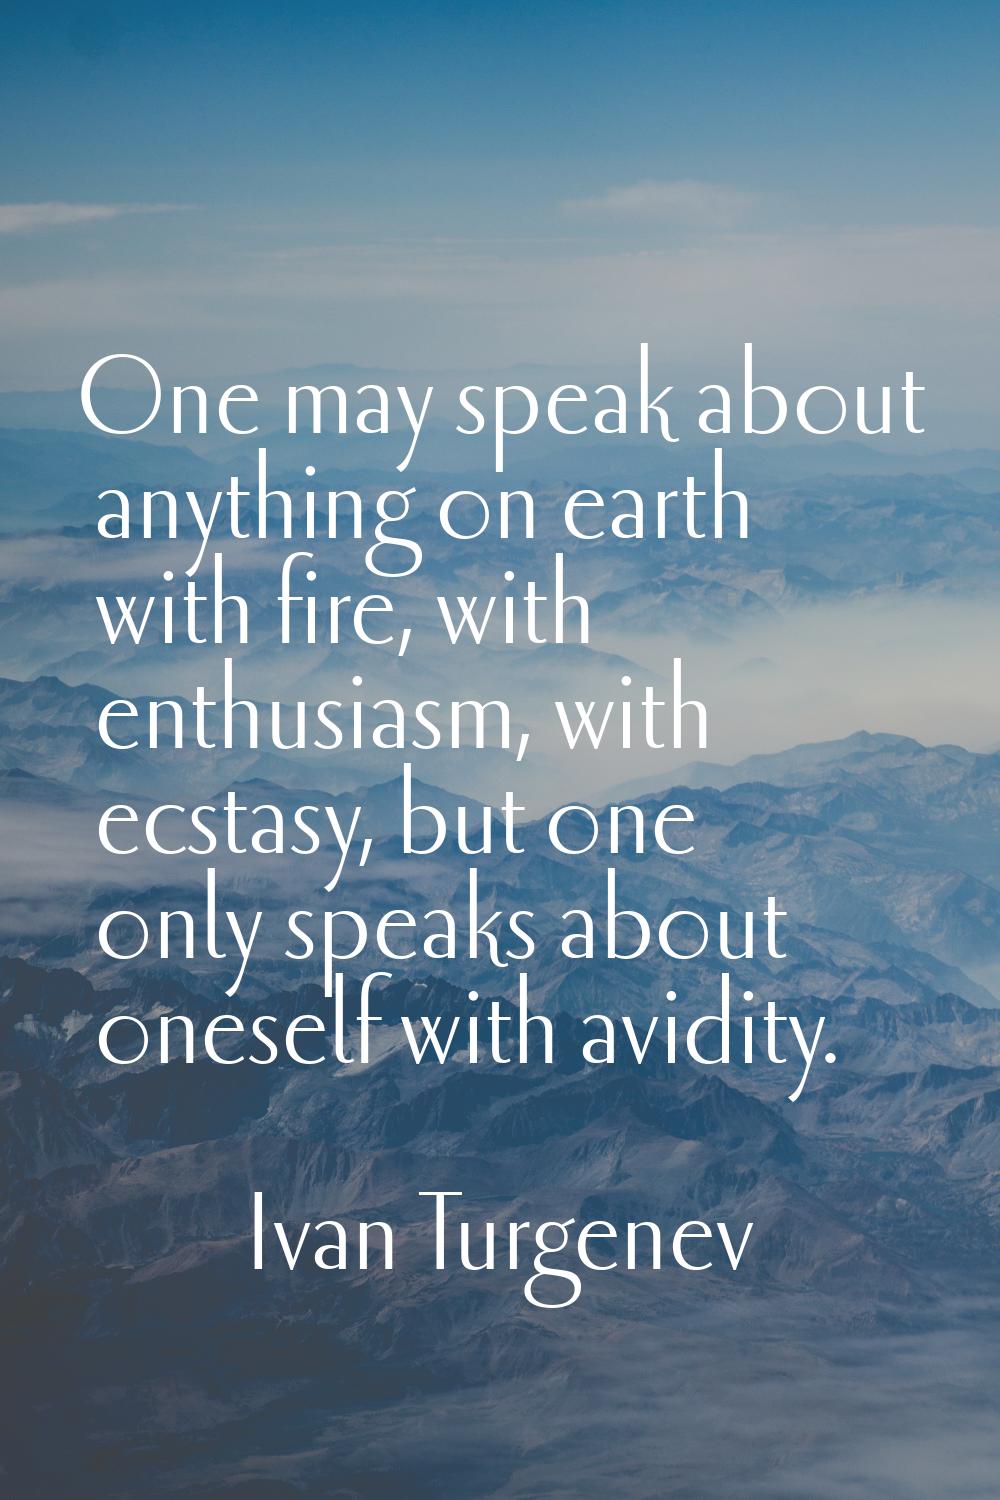 One may speak about anything on earth with fire, with enthusiasm, with ecstasy, but one only speaks